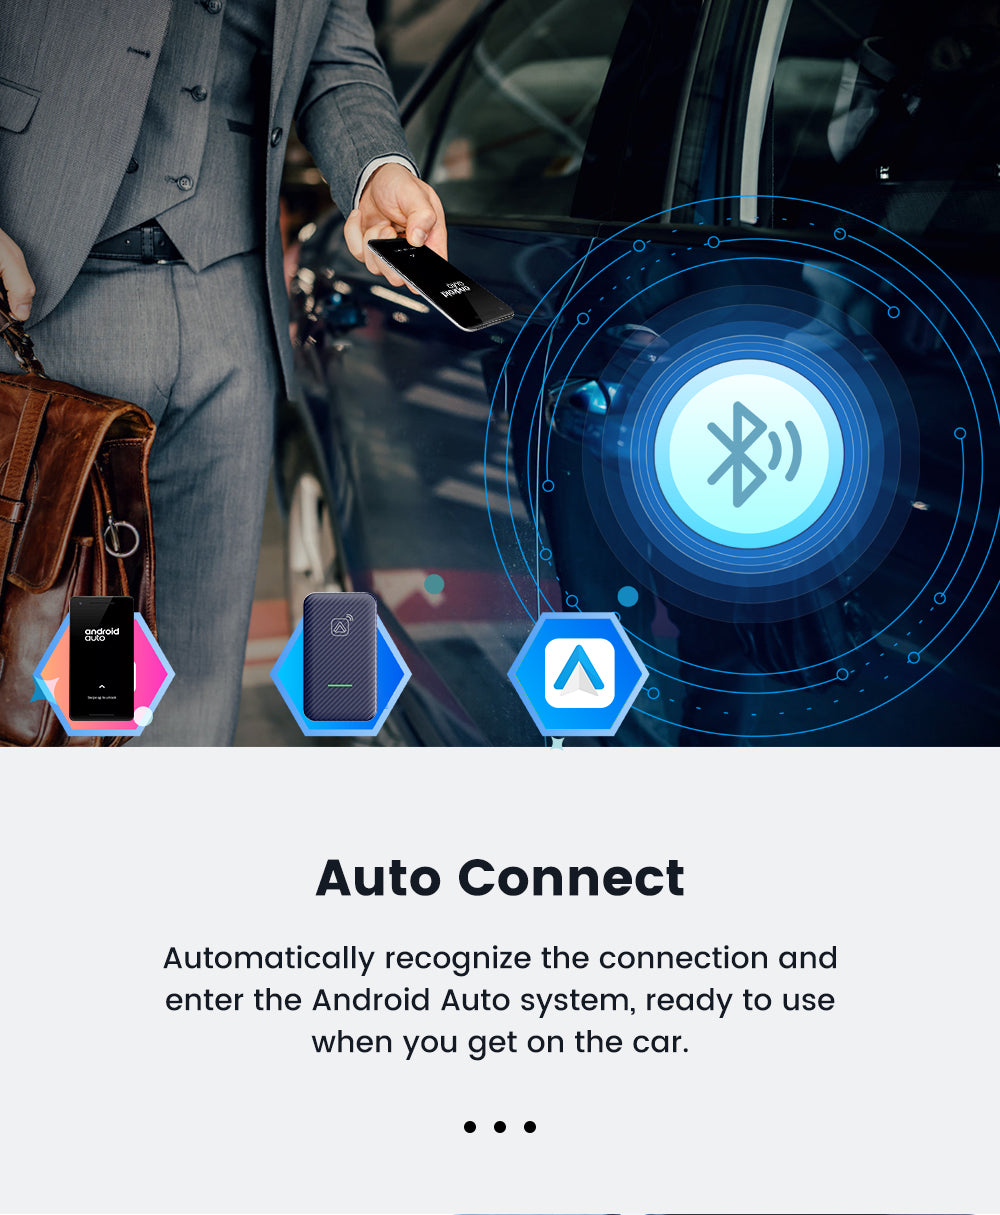 AA Wireless Android Auto (only) Adapter